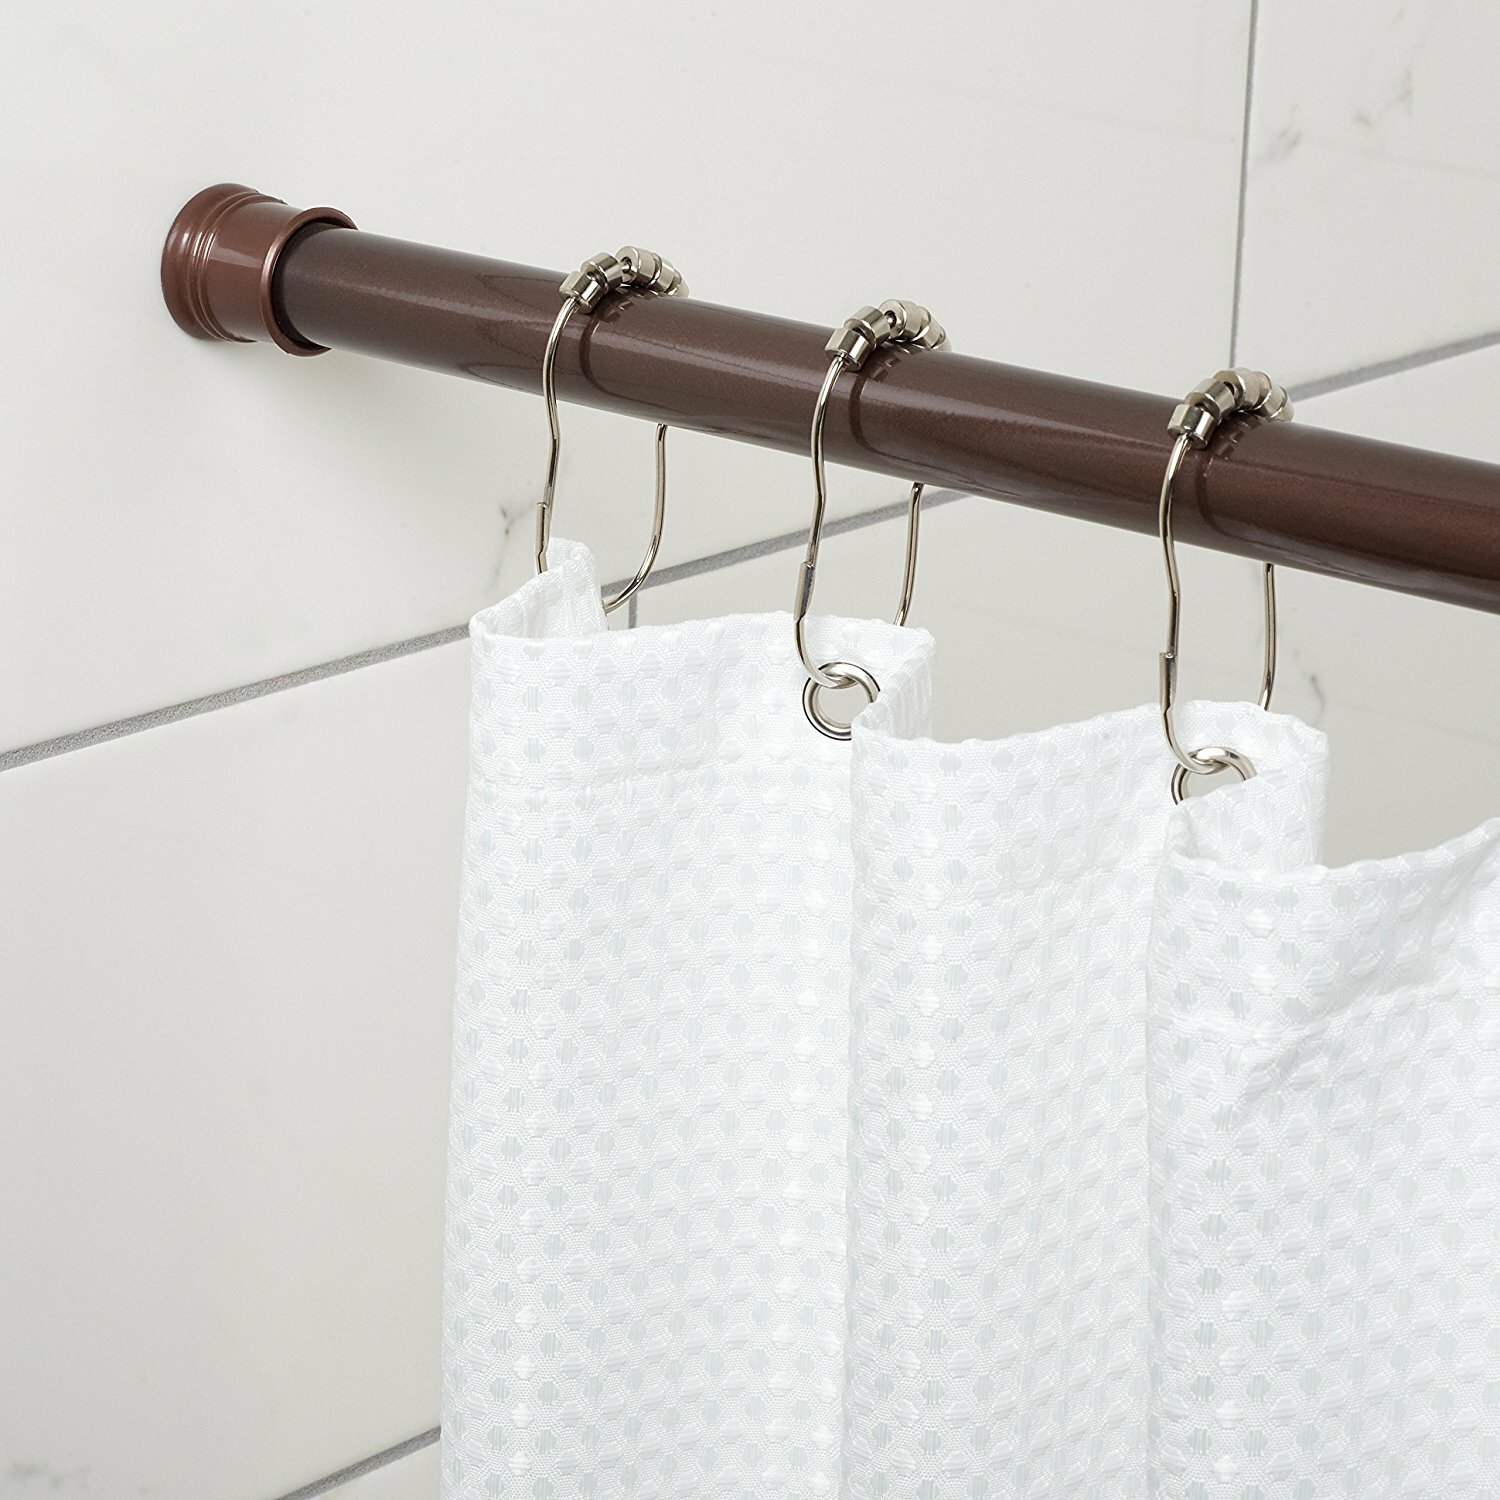 Bathroom Shower Curtain Rods | Shower Curtain Tension Rod | Shower Rod Extension